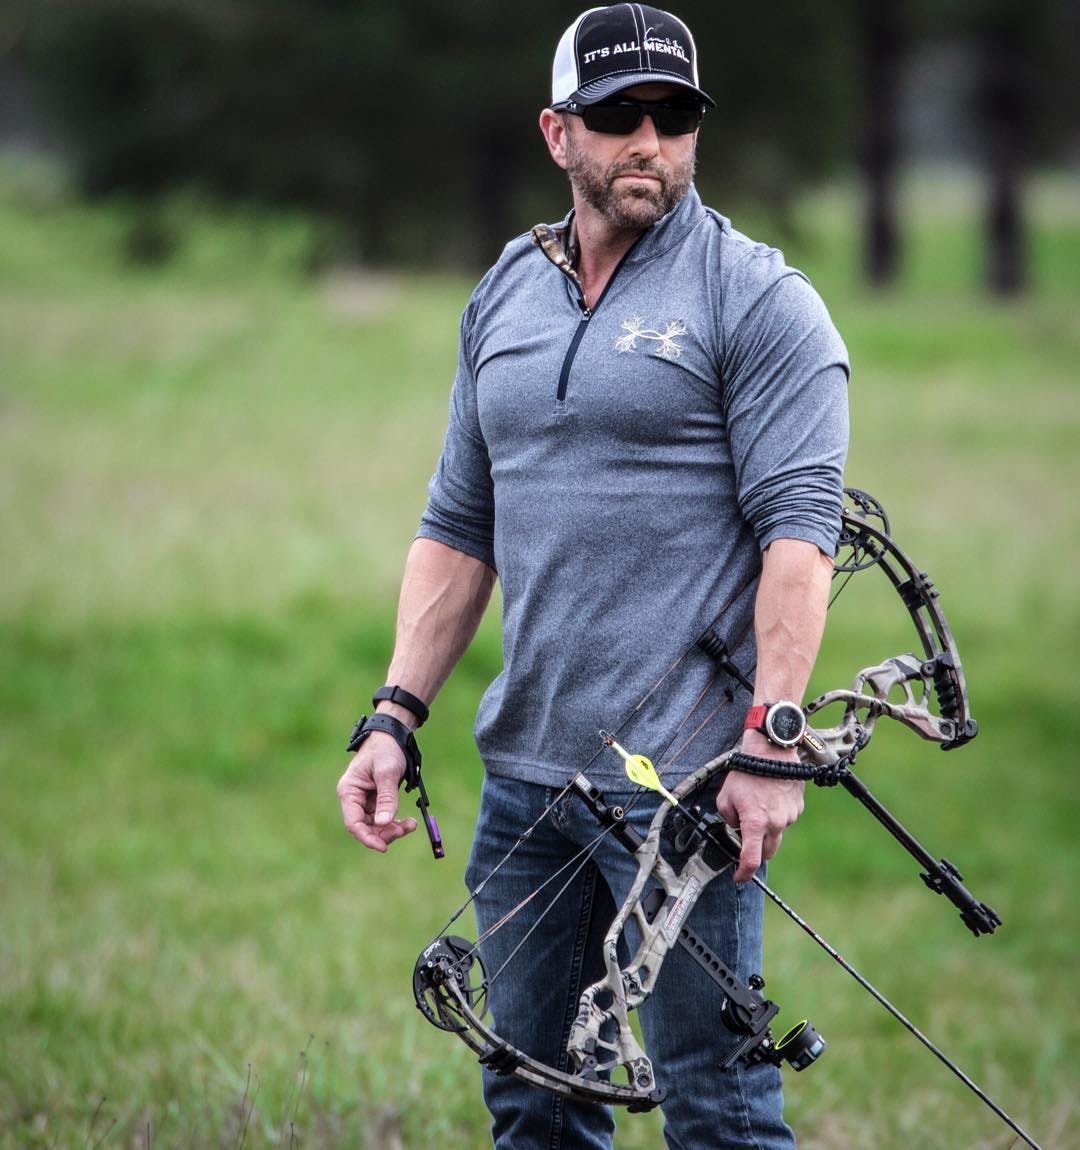 What can we learn from the elite bow hunter about life?, by Damian Mazurek